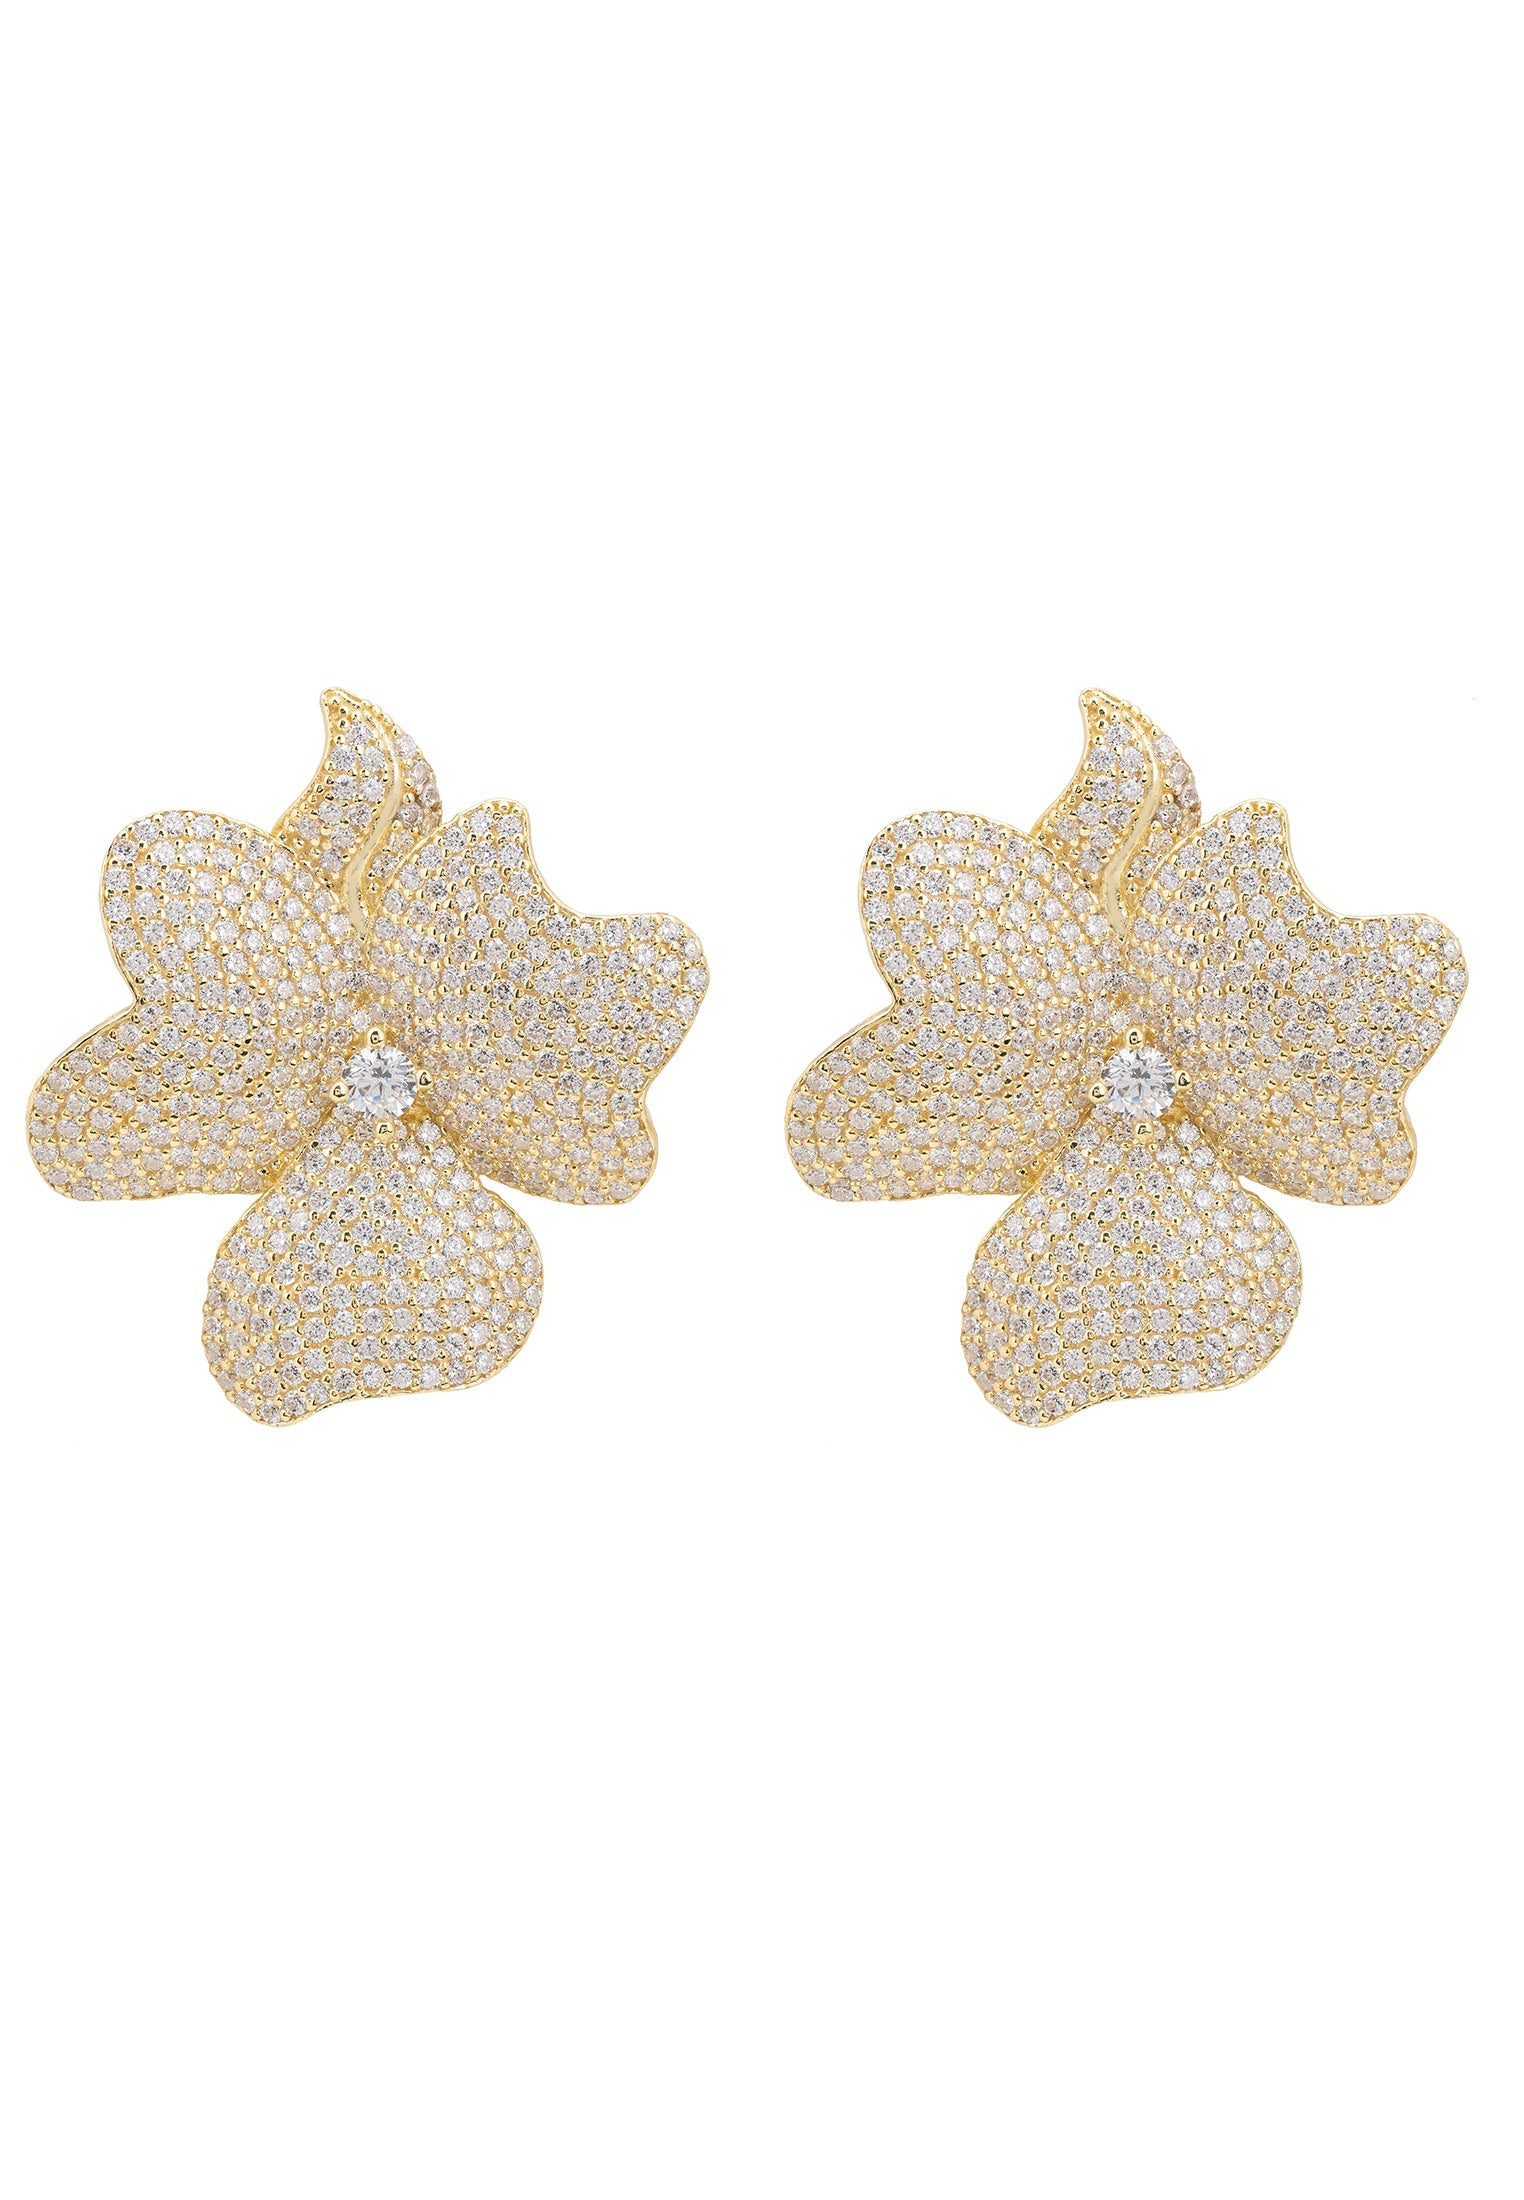 White CZ Flowers Large Stud Earrings Gold Plated